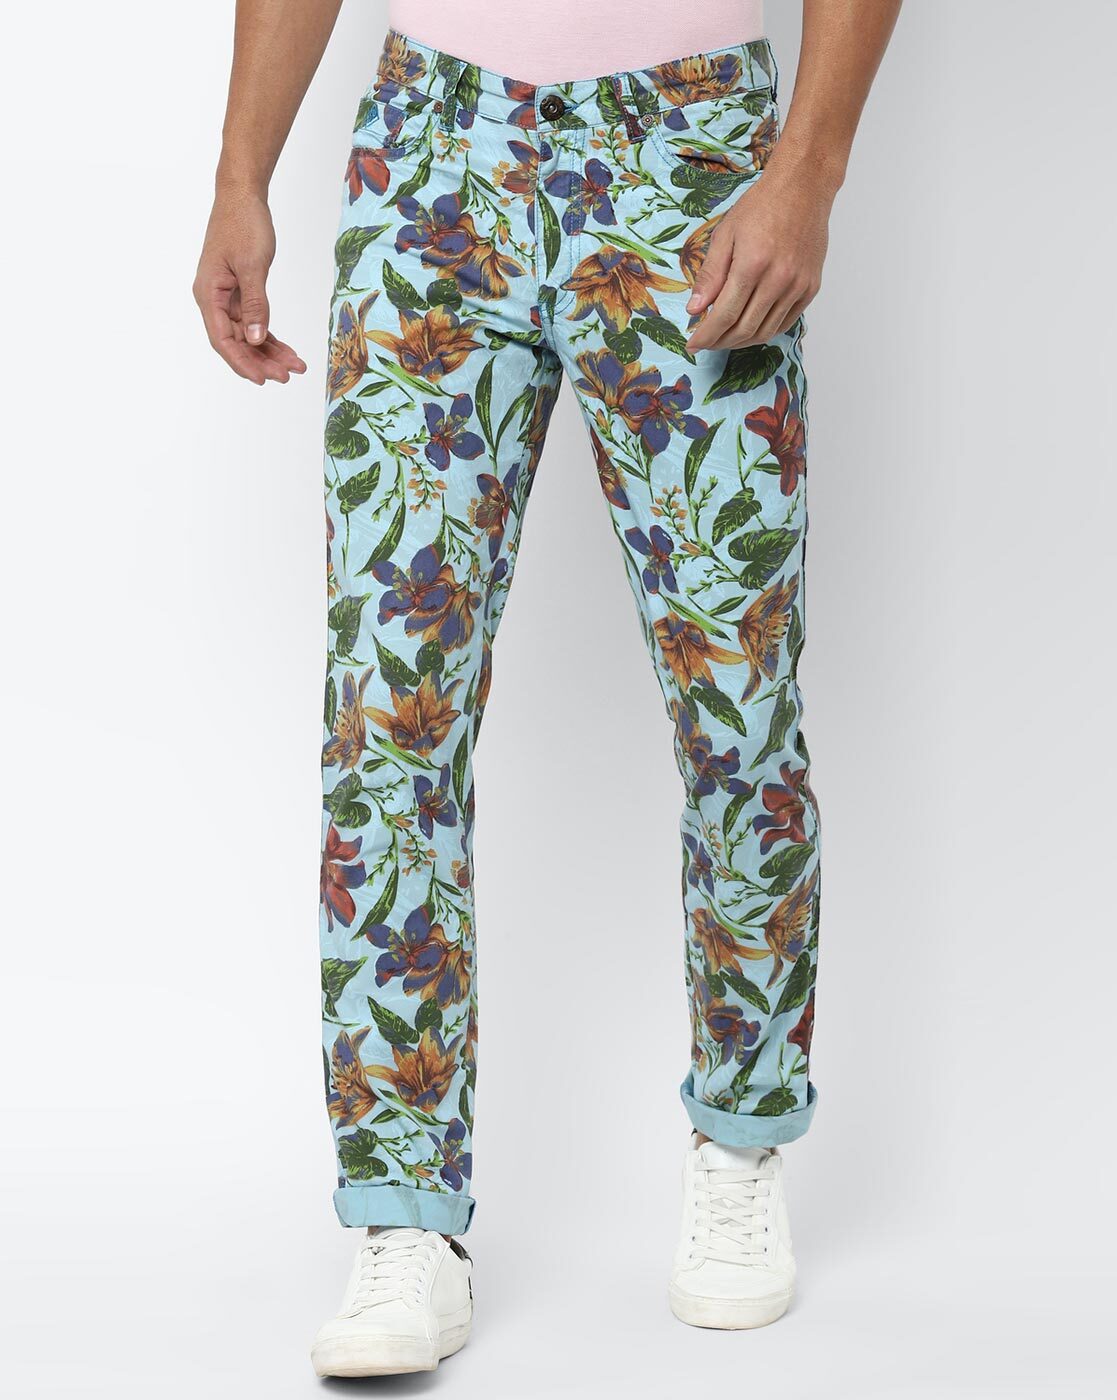 ASOS EDITION skinny suit pants in blue floral print with tiger patches   ASOS